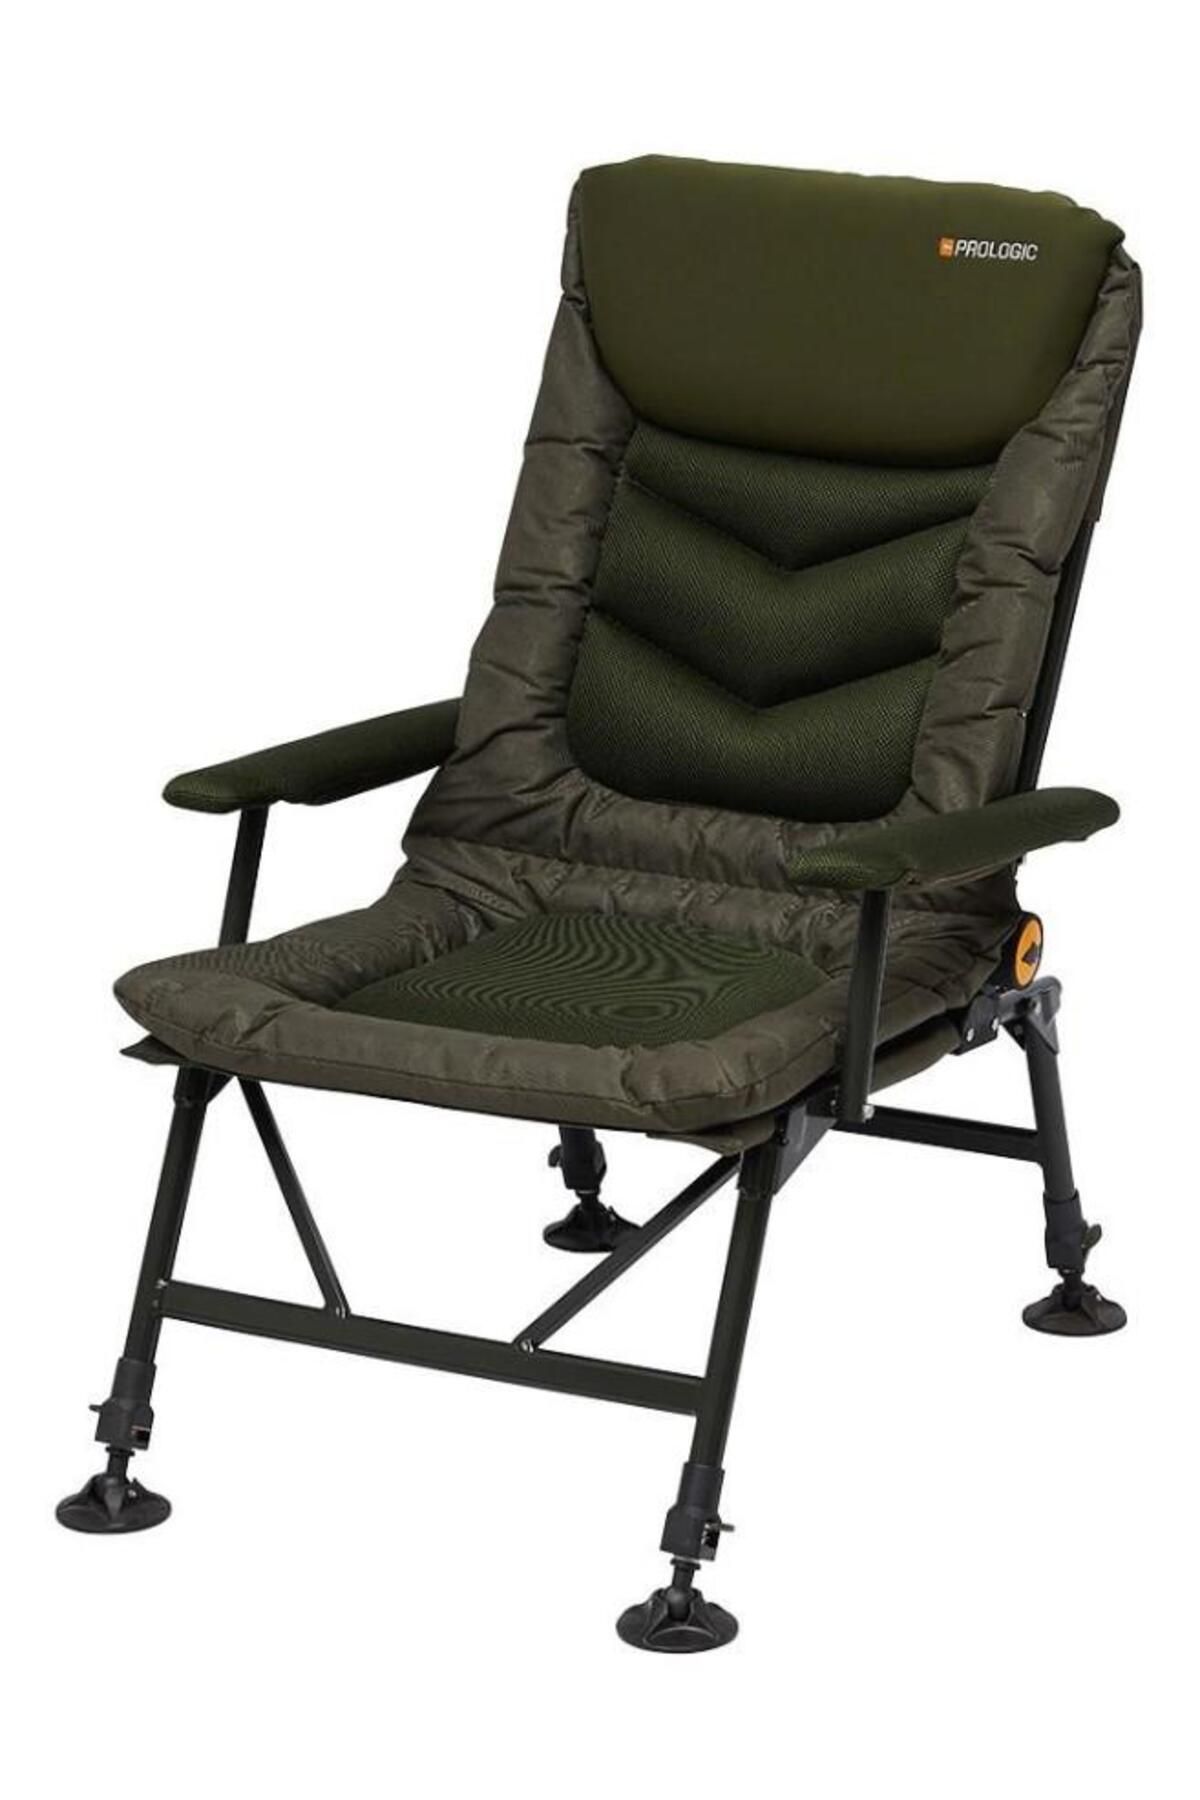 PROLOGIC Inspire Relax Recliner Chair With Armrests 140kg